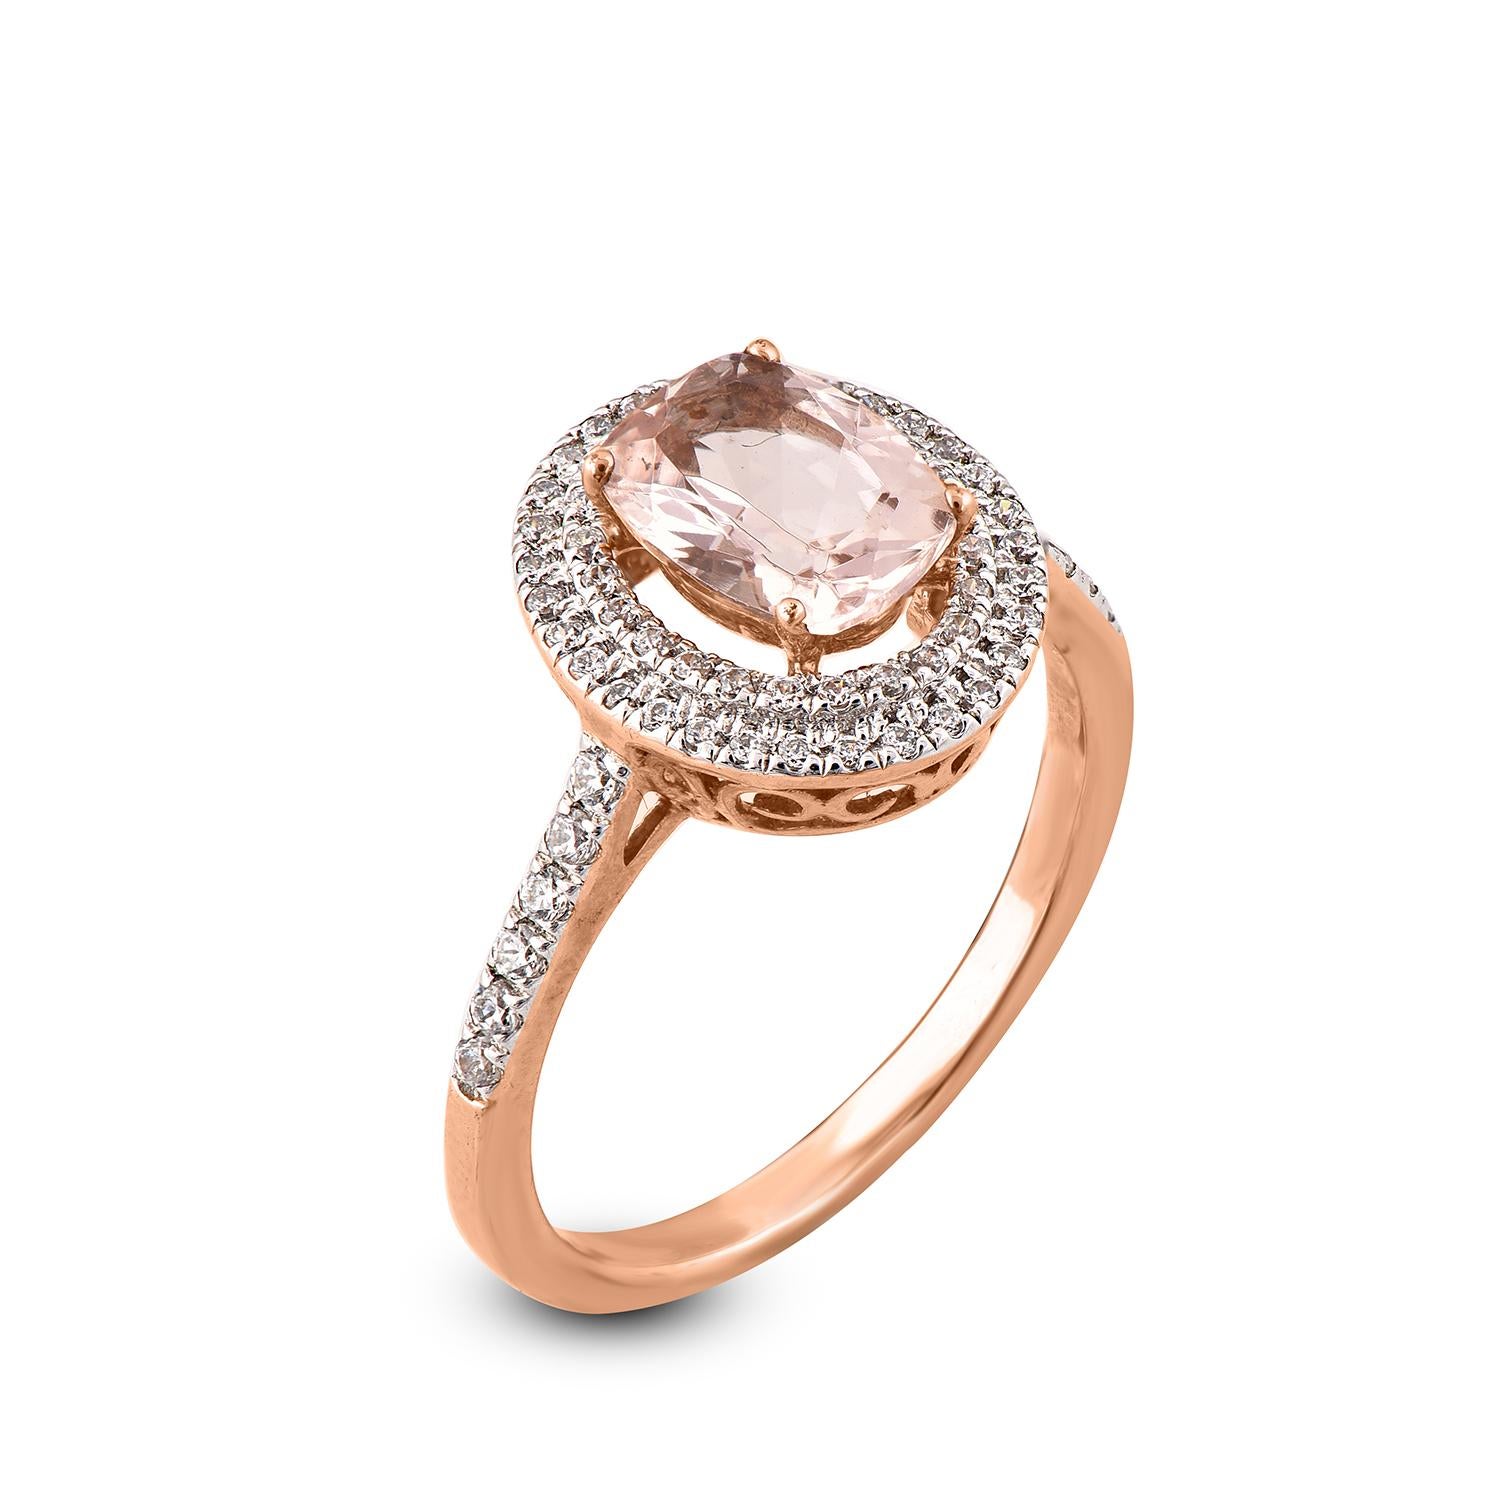 An easy and elegant addition to any attire, this sparkling diamond and Oval shape Morganite creates a style statement. Accentuated with 67 round, and 1 Morganite set in prong and pave setting and crafted by skillful craftsmen in 14 karat white gold.